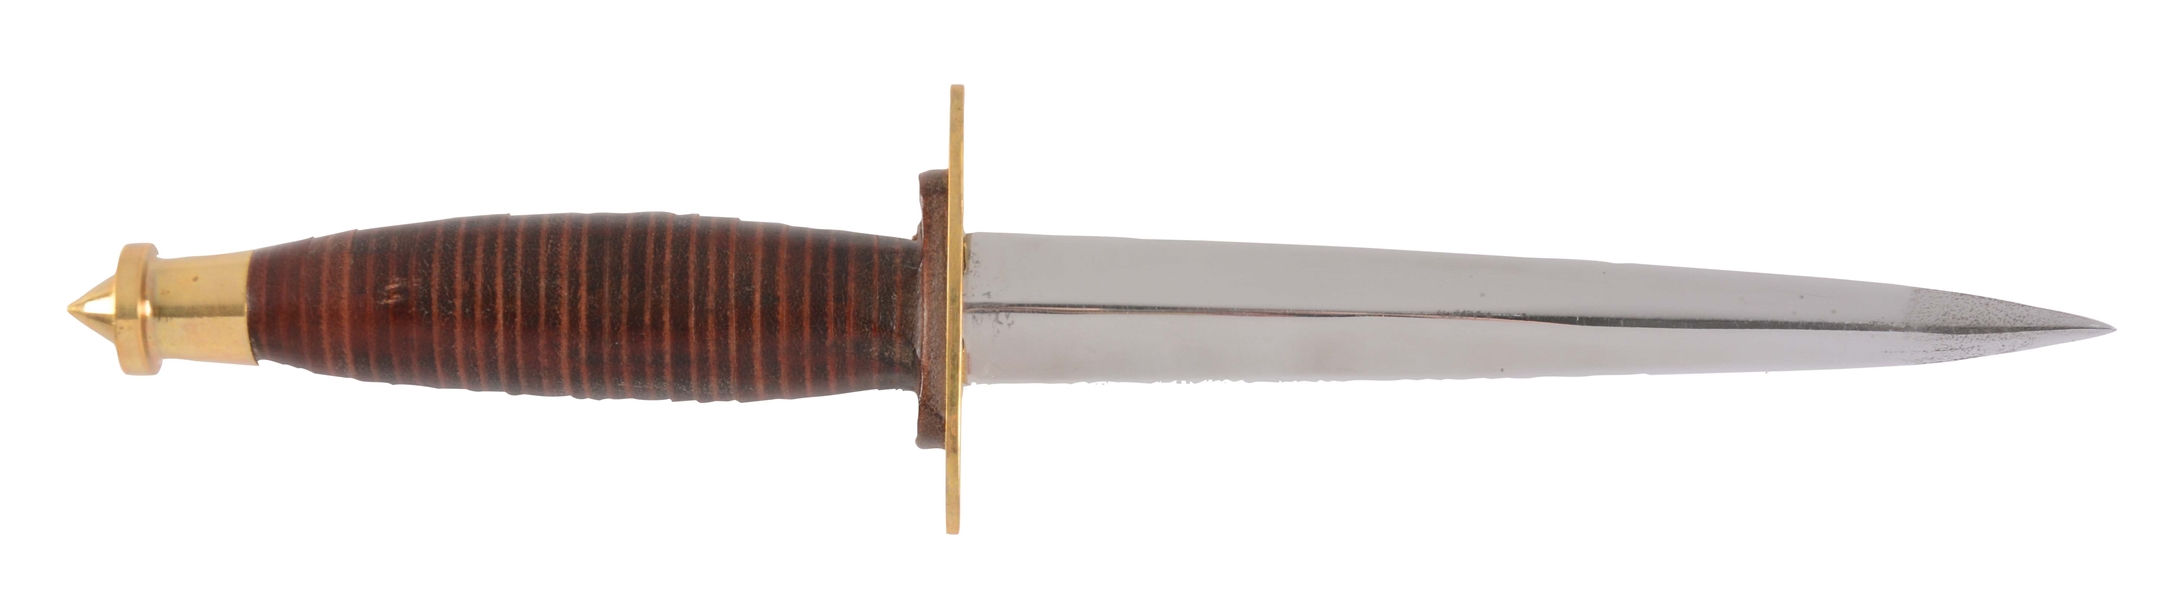 RARE M.H. COLE V-42 KNIFE WITH SCABBARD.